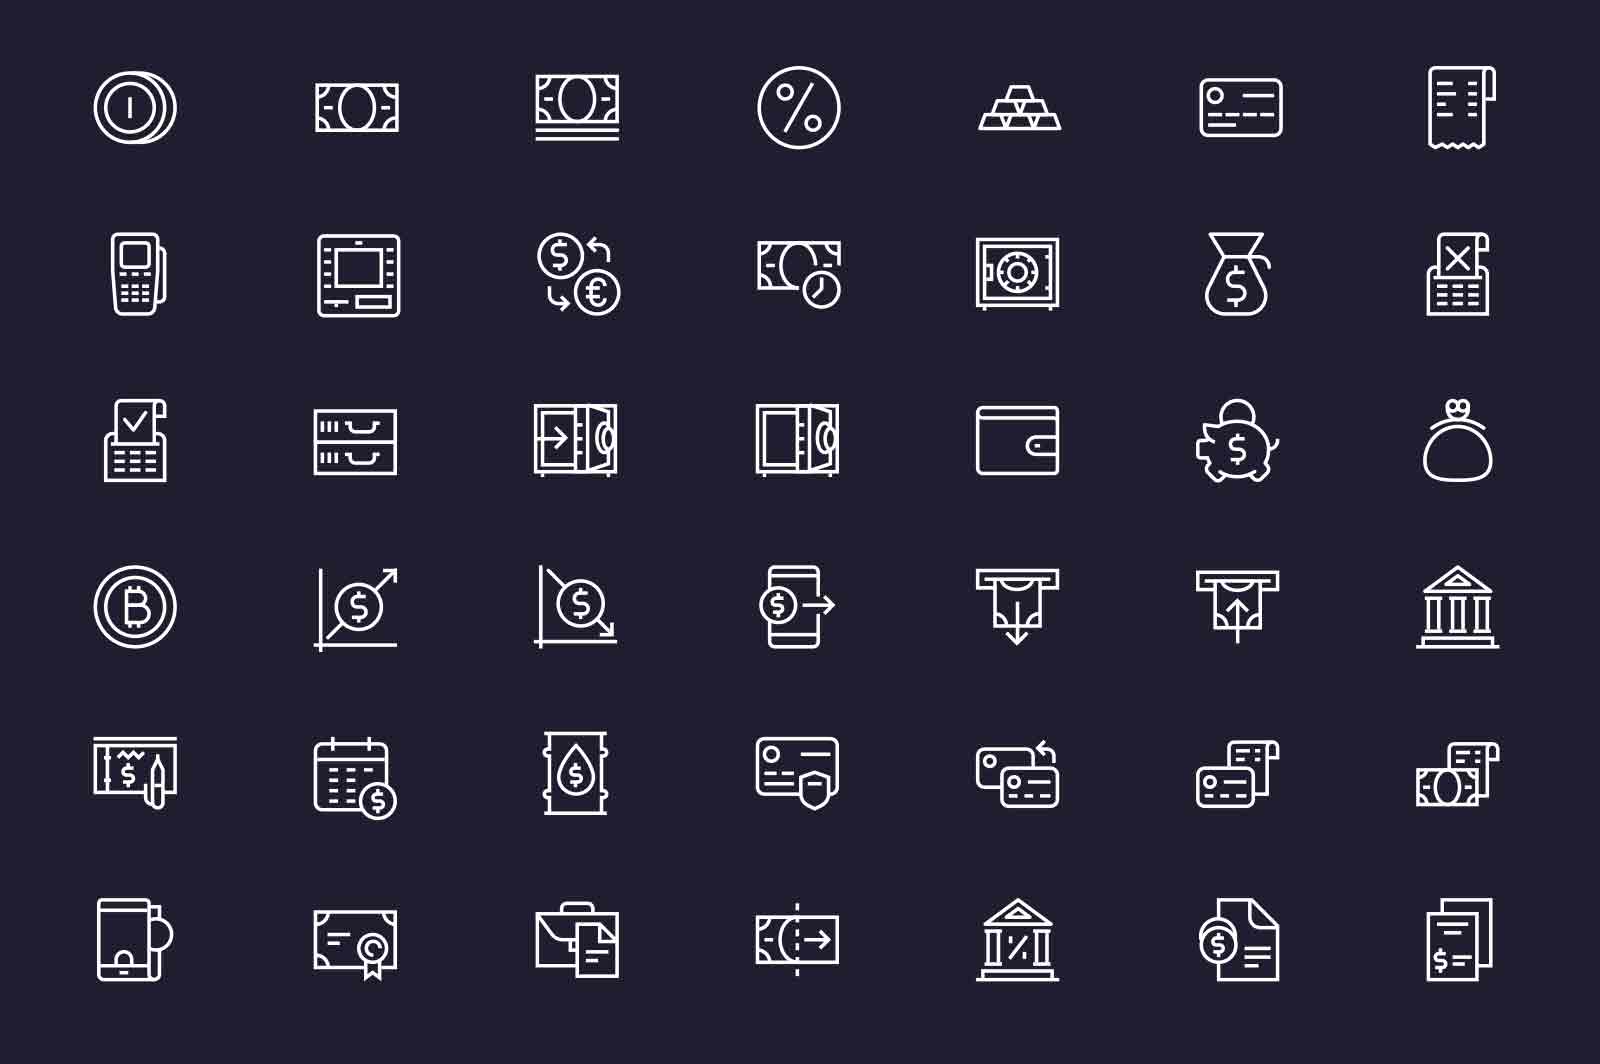 Economy and finance icons set vector illustration. Banking business, exchange rate line icon. Dark background